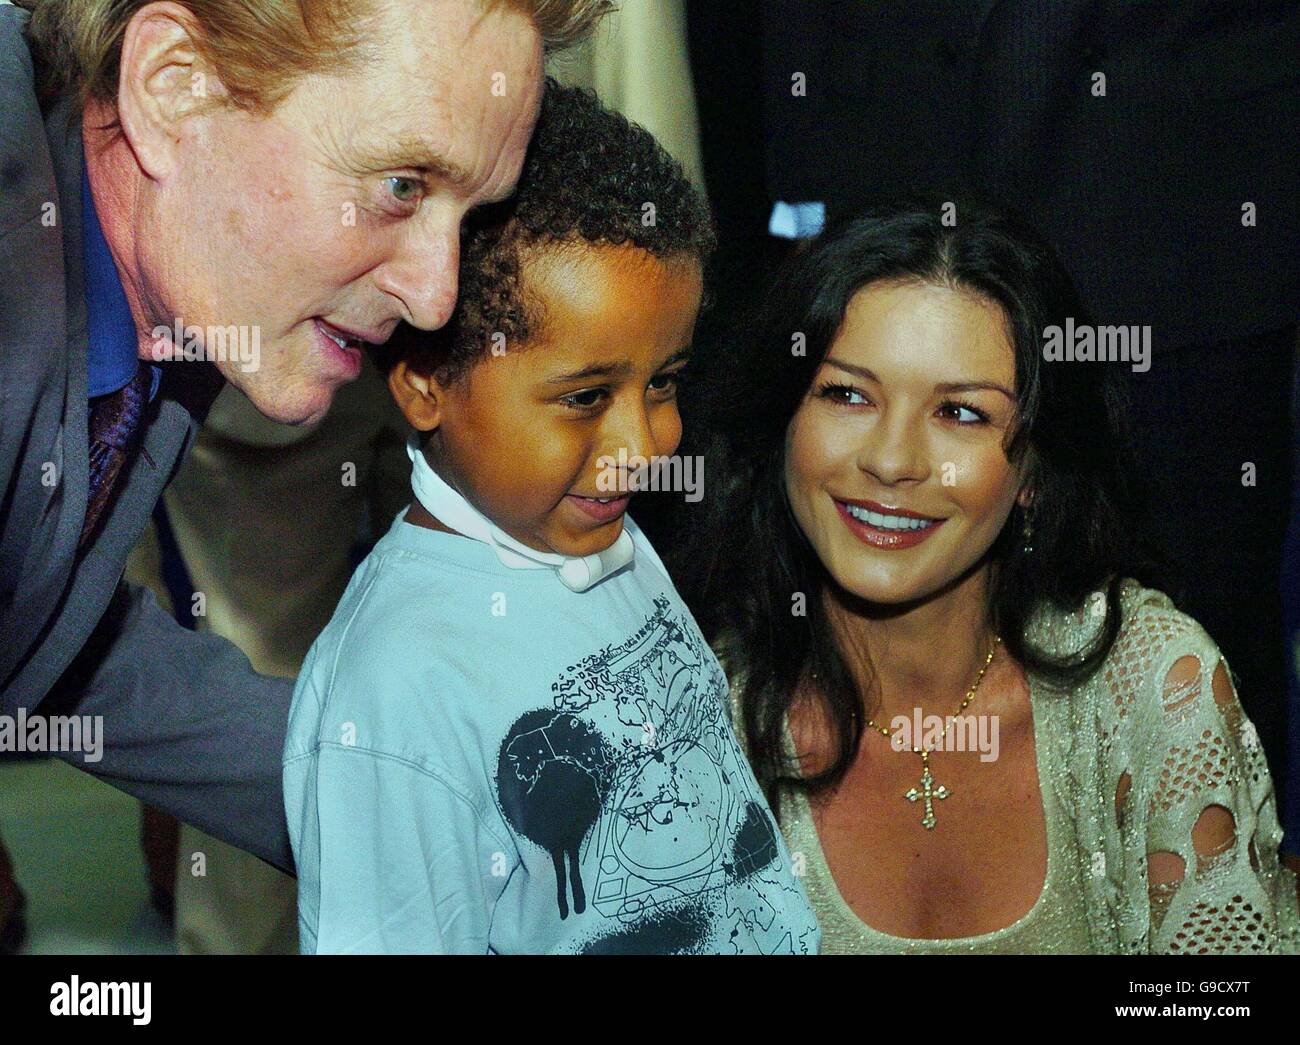 Welsh-born Hollywood actress Catherine Zeta Jones and her husband Michael Douglas meet six year old Taylor Lewis, during their visit to the Children's Hospital at the University Hospital of Wales in Cardiff, Wales. Stock Photo